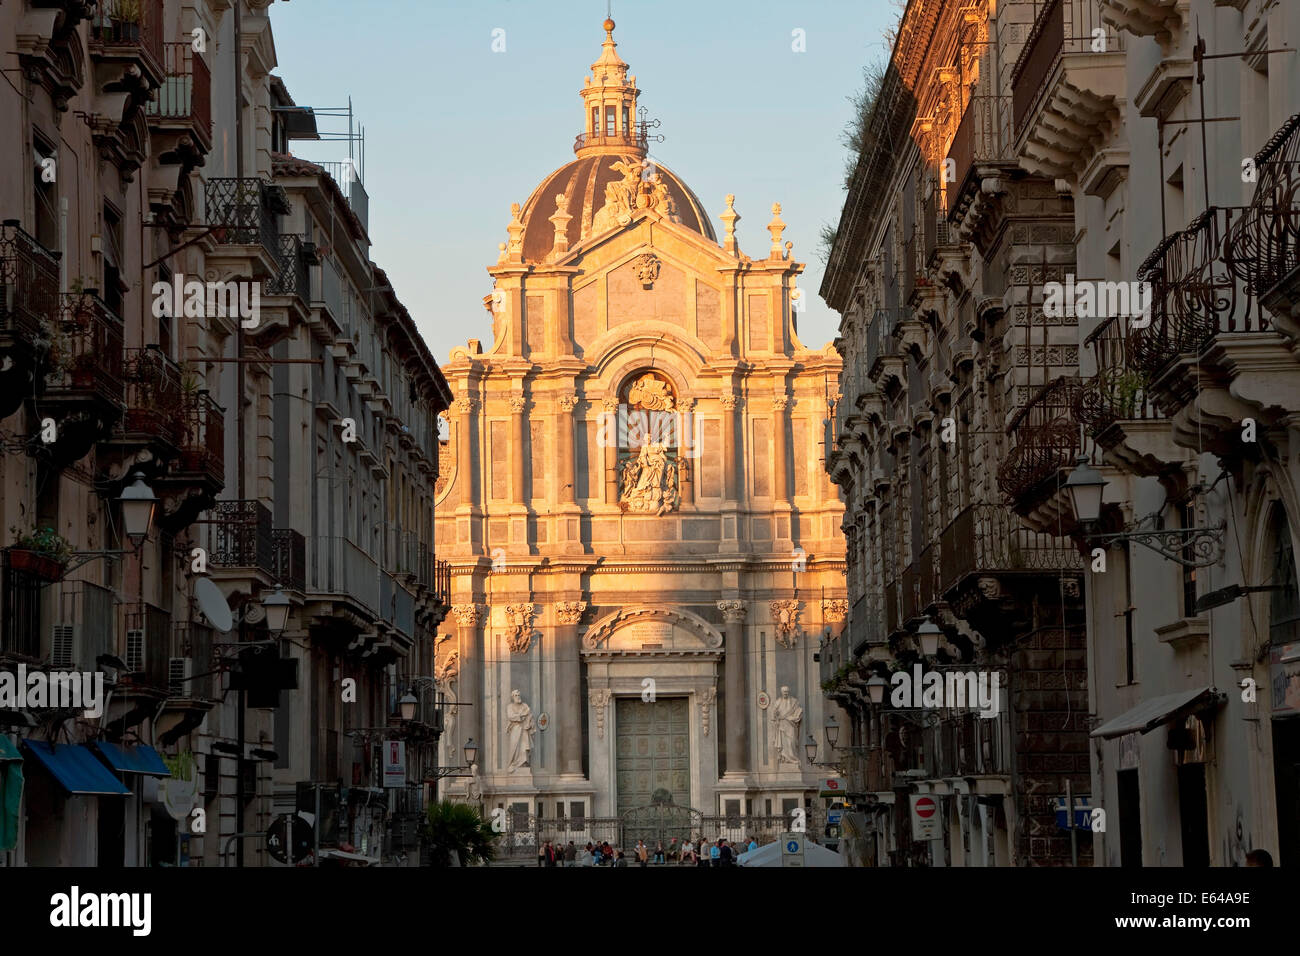 Exterior view of the Sant Agata Cathedral, Catania, Sicily, Italy Stock Photo